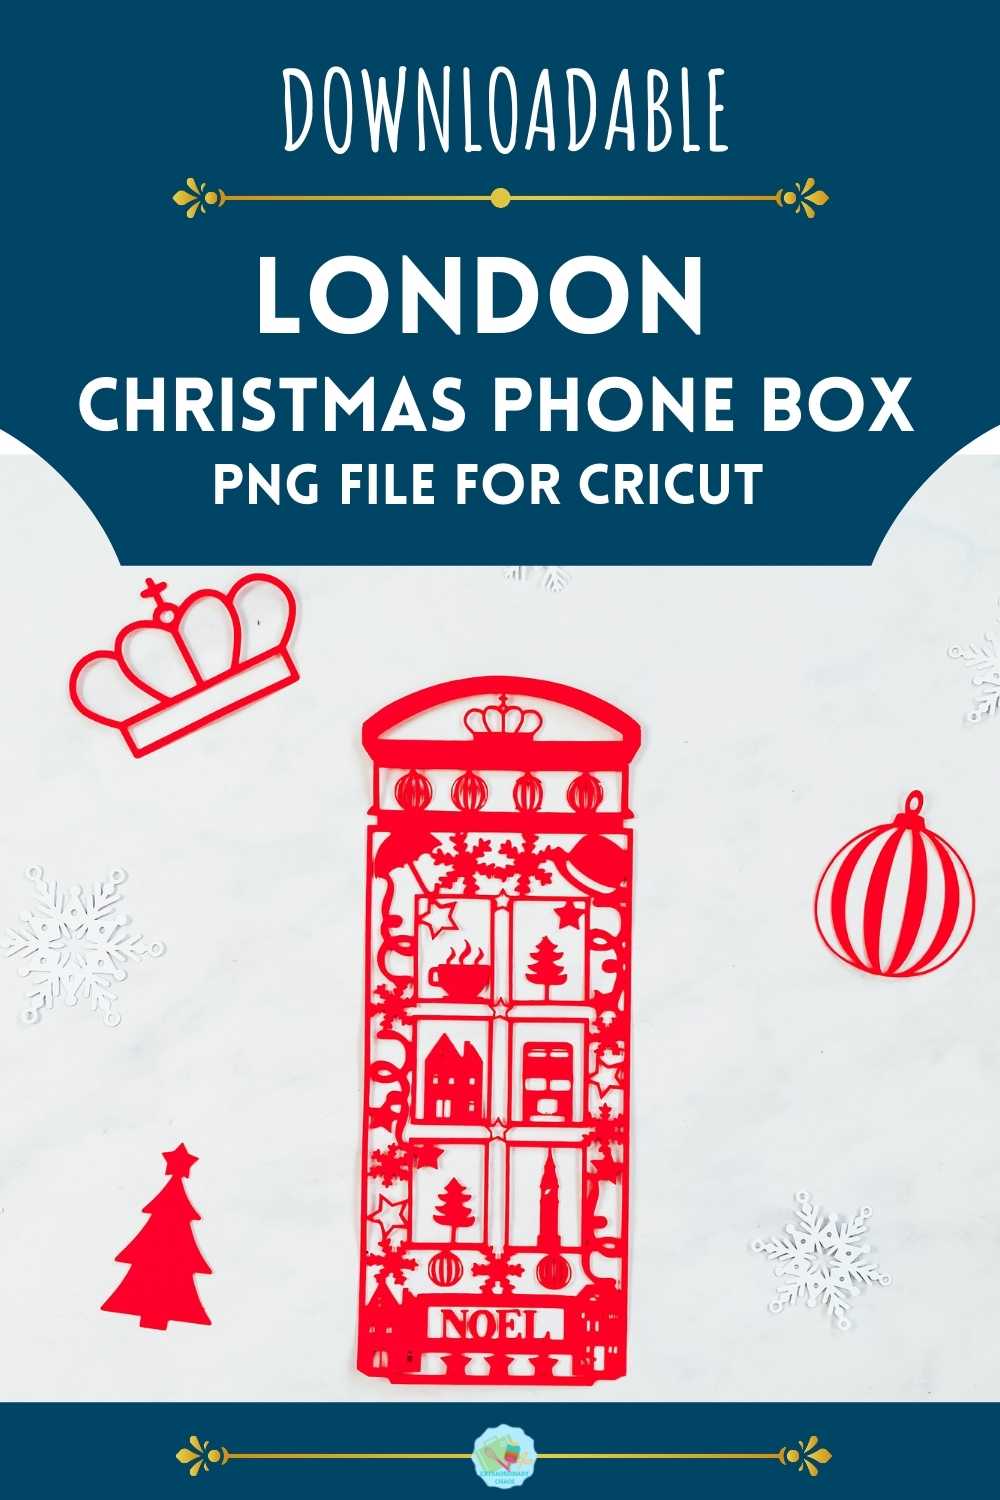 Free Downloadable Free Christmas London Phone Box For Cricut Crafts